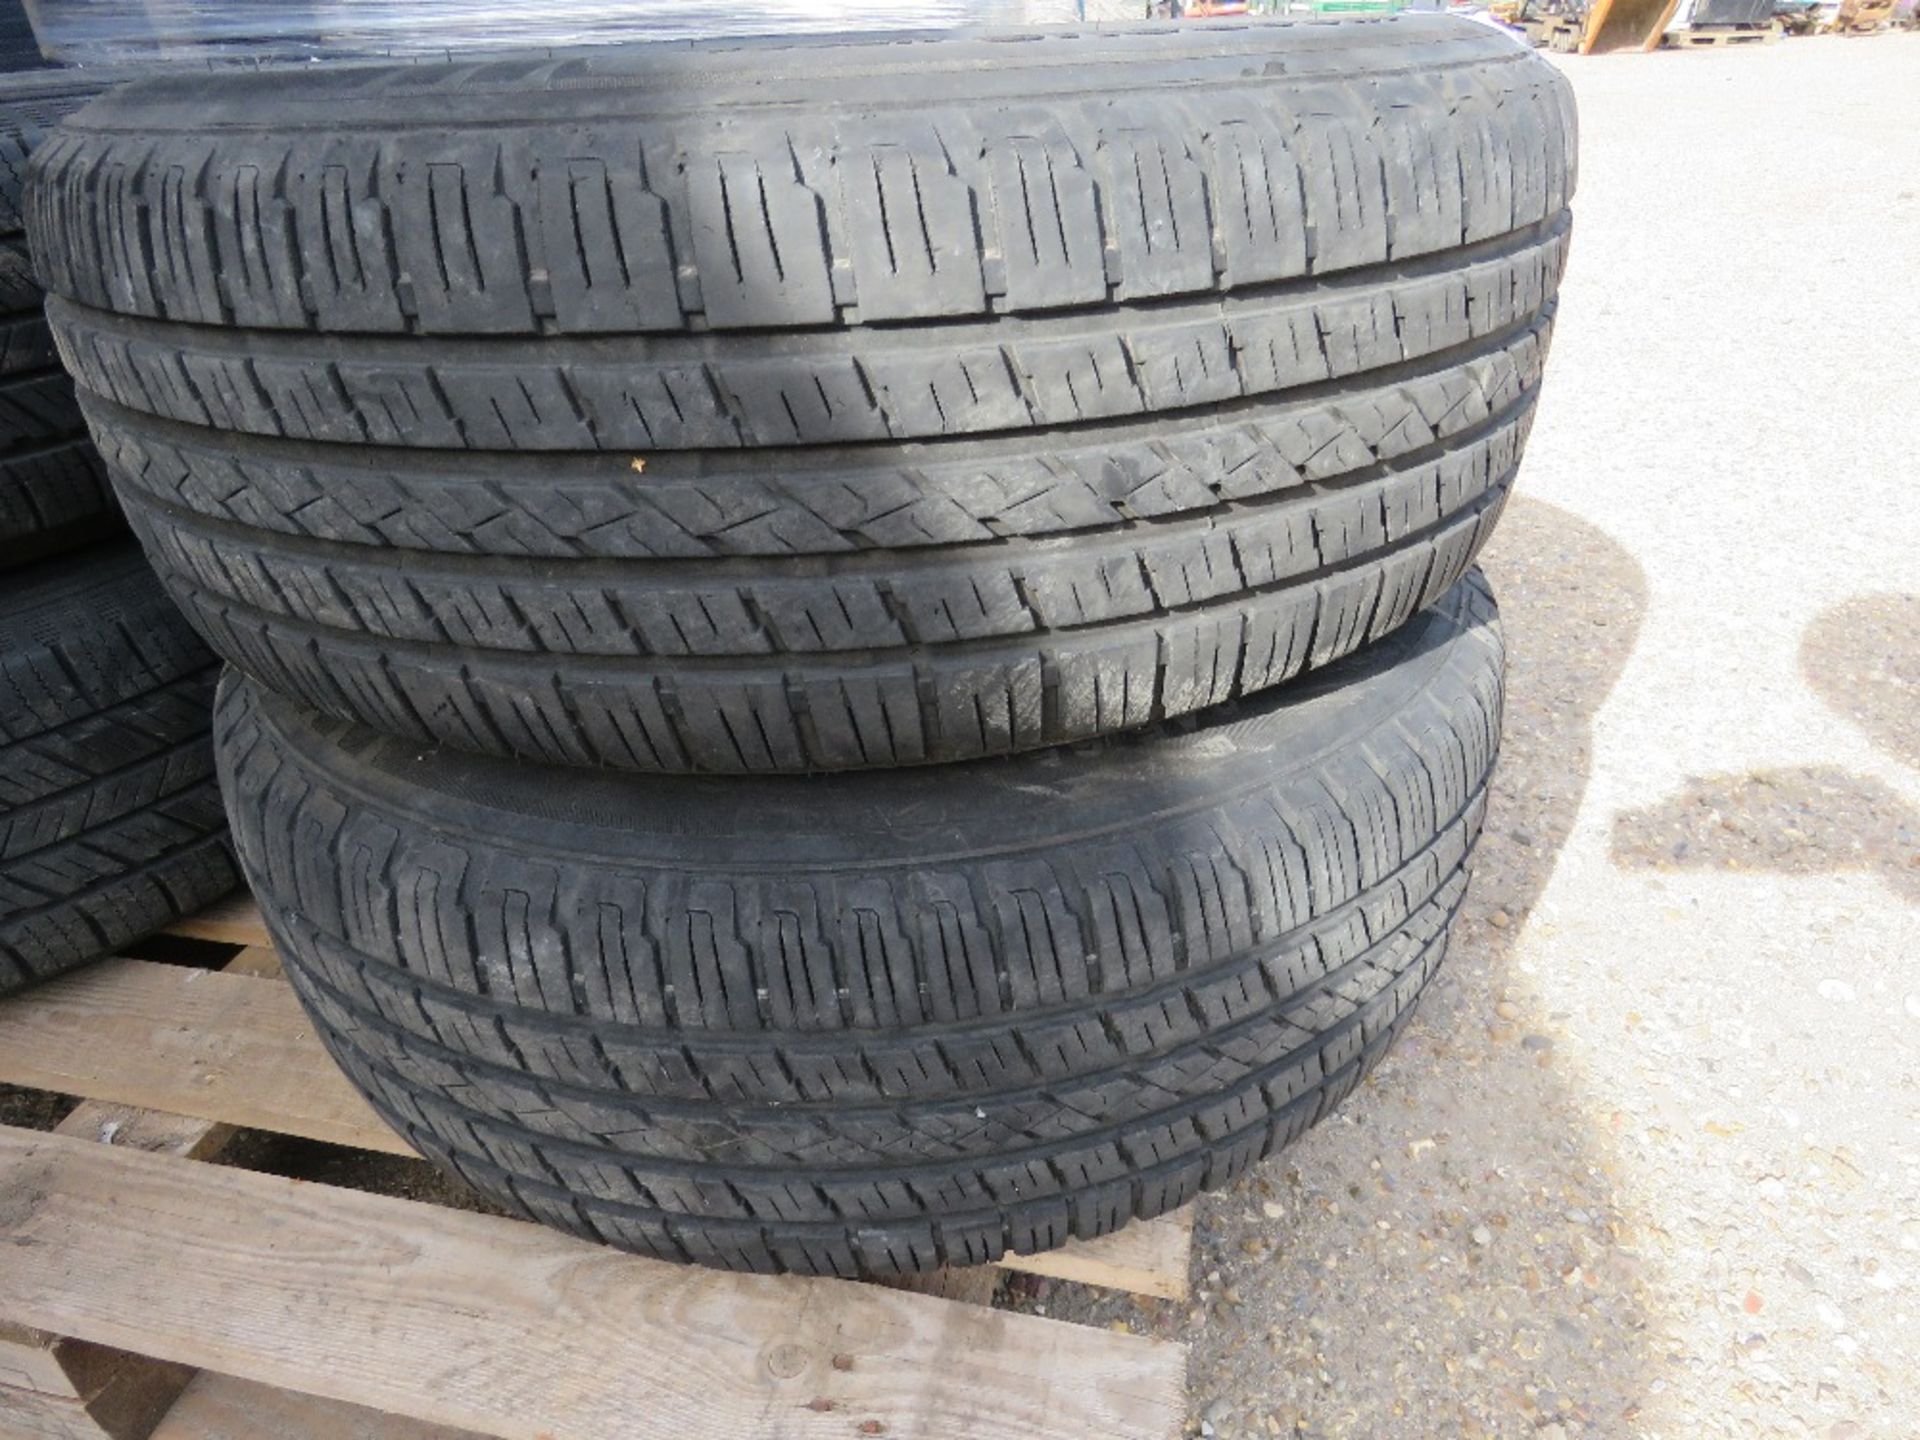 4NO MITSUBISHI 4WD ALLOY WHEELS AND TYRES 245/65R17 SIZE. THIS LOT IS SOLD UNDER THE AUCTIONEERS MAR - Image 2 of 8